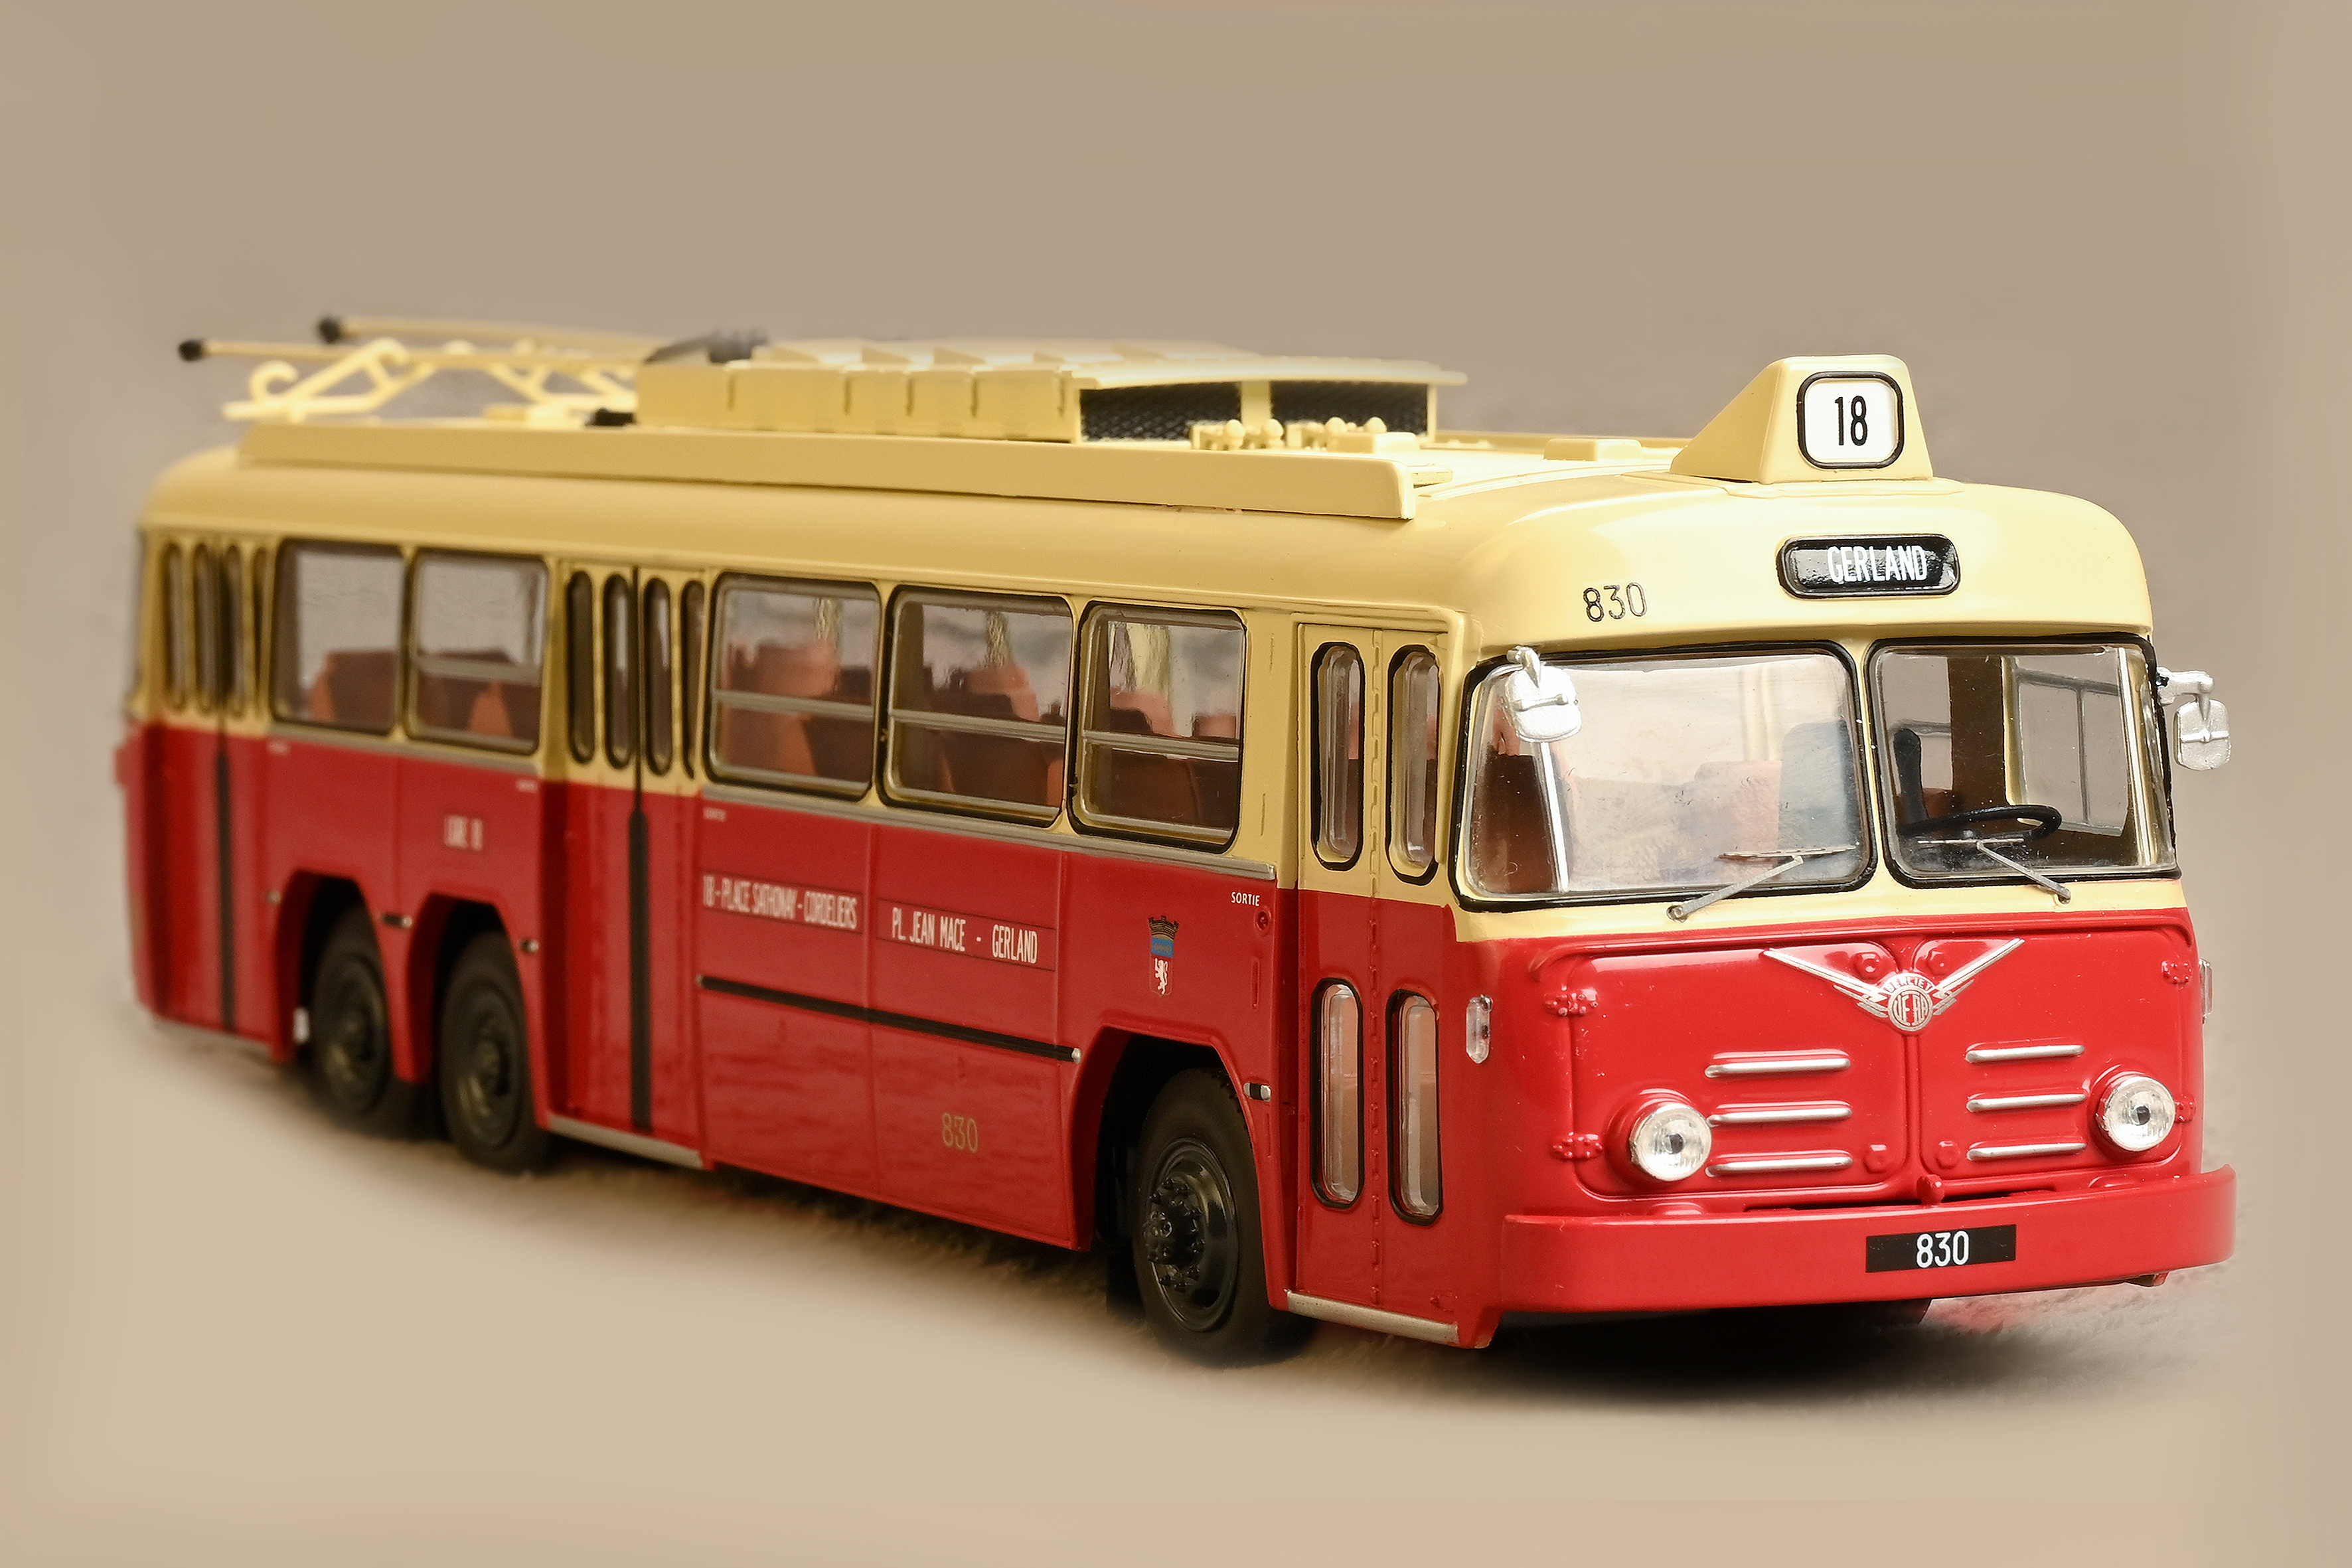 Bus and coach models